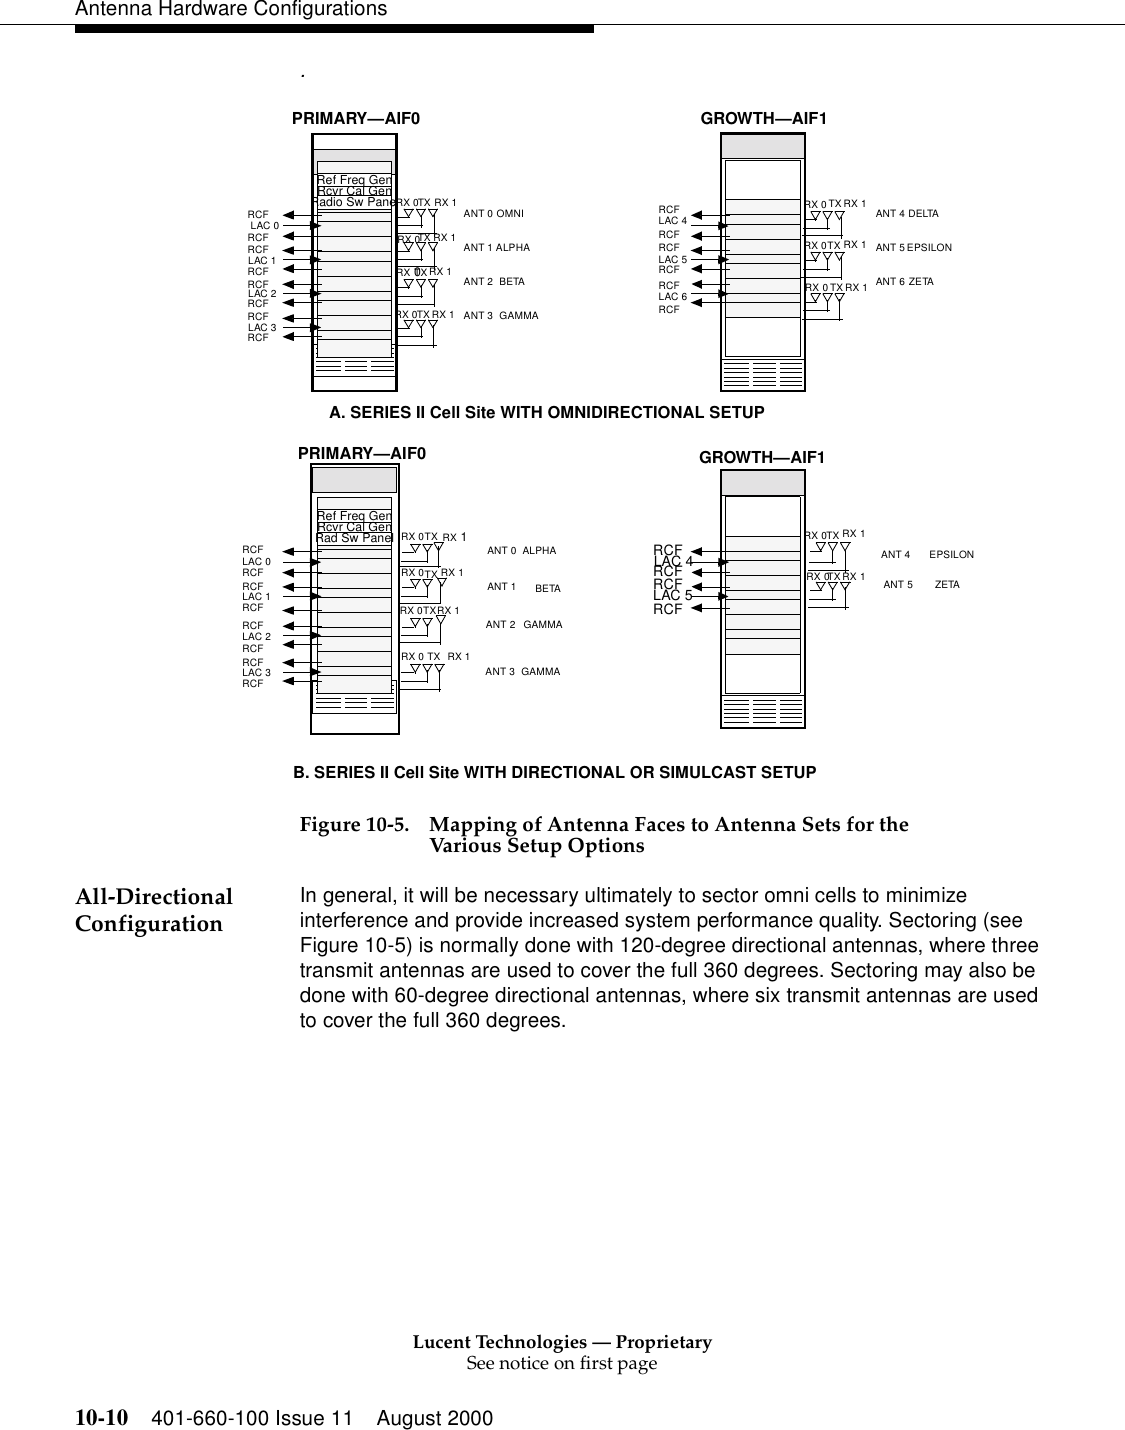 Lucent Technologies — ProprietarySee notice on first page10-10 401-660-100 Issue 11 August 2000Antenna Hardware Configurations.Figure 10-5. Mapping of Antenna Faces to Antenna Sets for theVarious Setup Options All-Directional Configuration In general, it will be necessary ultimately to sector omni cells to minimize interference and provide increased system performance quality. Sectoring (see Figure 10-5) is normally done with 120-degree directional antennas, where three transmit antennas are used to cover the full 360 degrees. Sectoring may also be done with 60-degree directional antennas, where six transmit antennas are used to cover the full 360 degrees.GROWTH—AIF1RX 0 RX 1TXRX 0 RX 1TXANT 5ANT 4B. SERIES II Cell Site WITH DIRECTIONAL OR SIMULCAST SETUPRef Freq GenRcvr Cal GenPRIMARY—AIF0RX 0 RX 1TXRX 0 RX 1TXRX 0 RX 1TXRX 0 RX 1TXANT 0ANT 1ANT 2Rad Sw Panel ALPHABETAGAMMAEPSILONZETARCFLAC 5RCFRCFLAC 4RCFRCFLAC 3RCFRCFLAC 2RCFRCFLAC 1RCFRCFLAC 0RCFGROWTH—AIF1RCFLAC 6RCFRCFLAC 5RCFRCFLAC 4RCFANT 5ANT 6ANT 4A. SERIES II Cell Site WITH OMNIDIRECTIONAL SETUPRef Freq GenRcvr Cal GenRCFLAC 3RCFRCFLAC 2RCFRCFLAC 1RCFRCFLAC 0RCFPRIMARY—AIF0RX 0 RX 1TXRX 0 RX 1TXRX 0 RX 1TXRX 0 RX 1TX ANT 0ANT 1ANT 3ANT 2Radio Sw Panel OMNIALPHABETAGAMMADELTAEPSILONZETARX 0 RX 1TXRX 0 RX 1TXRX 1TXRX 0ANT 3 GAMMA